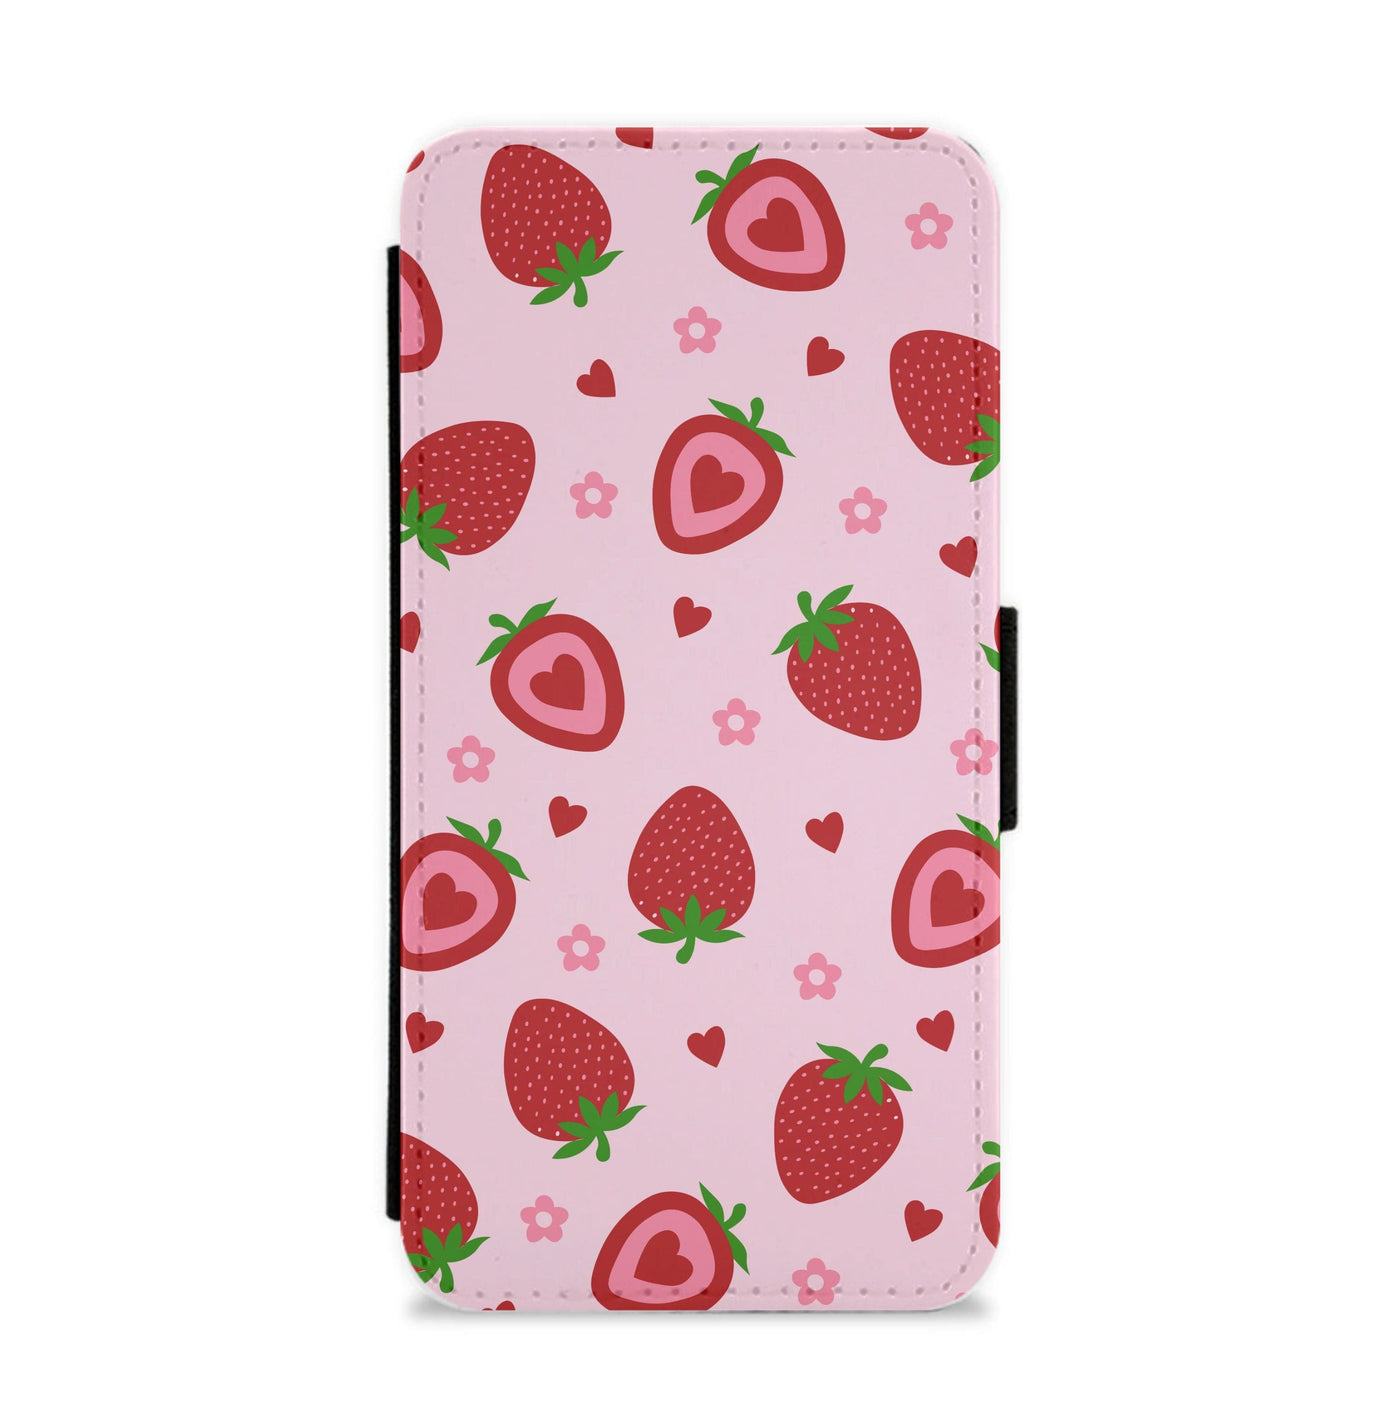 Strawberries And Hearts - Fruit Patterns Flip / Wallet Phone Case